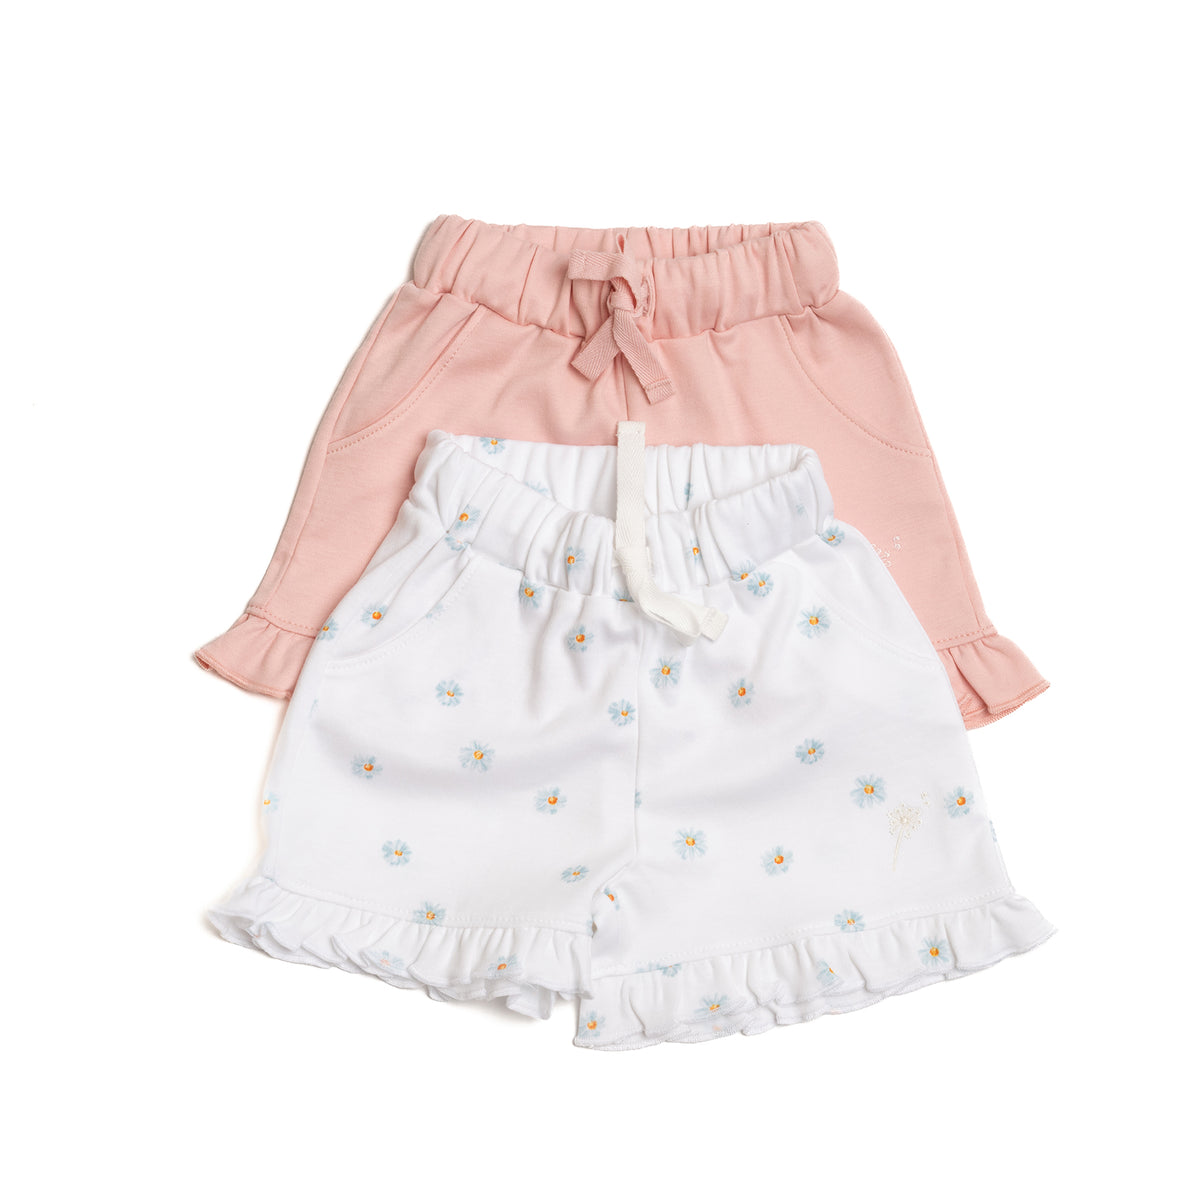 Coquette ruffle shorts - Pale pink